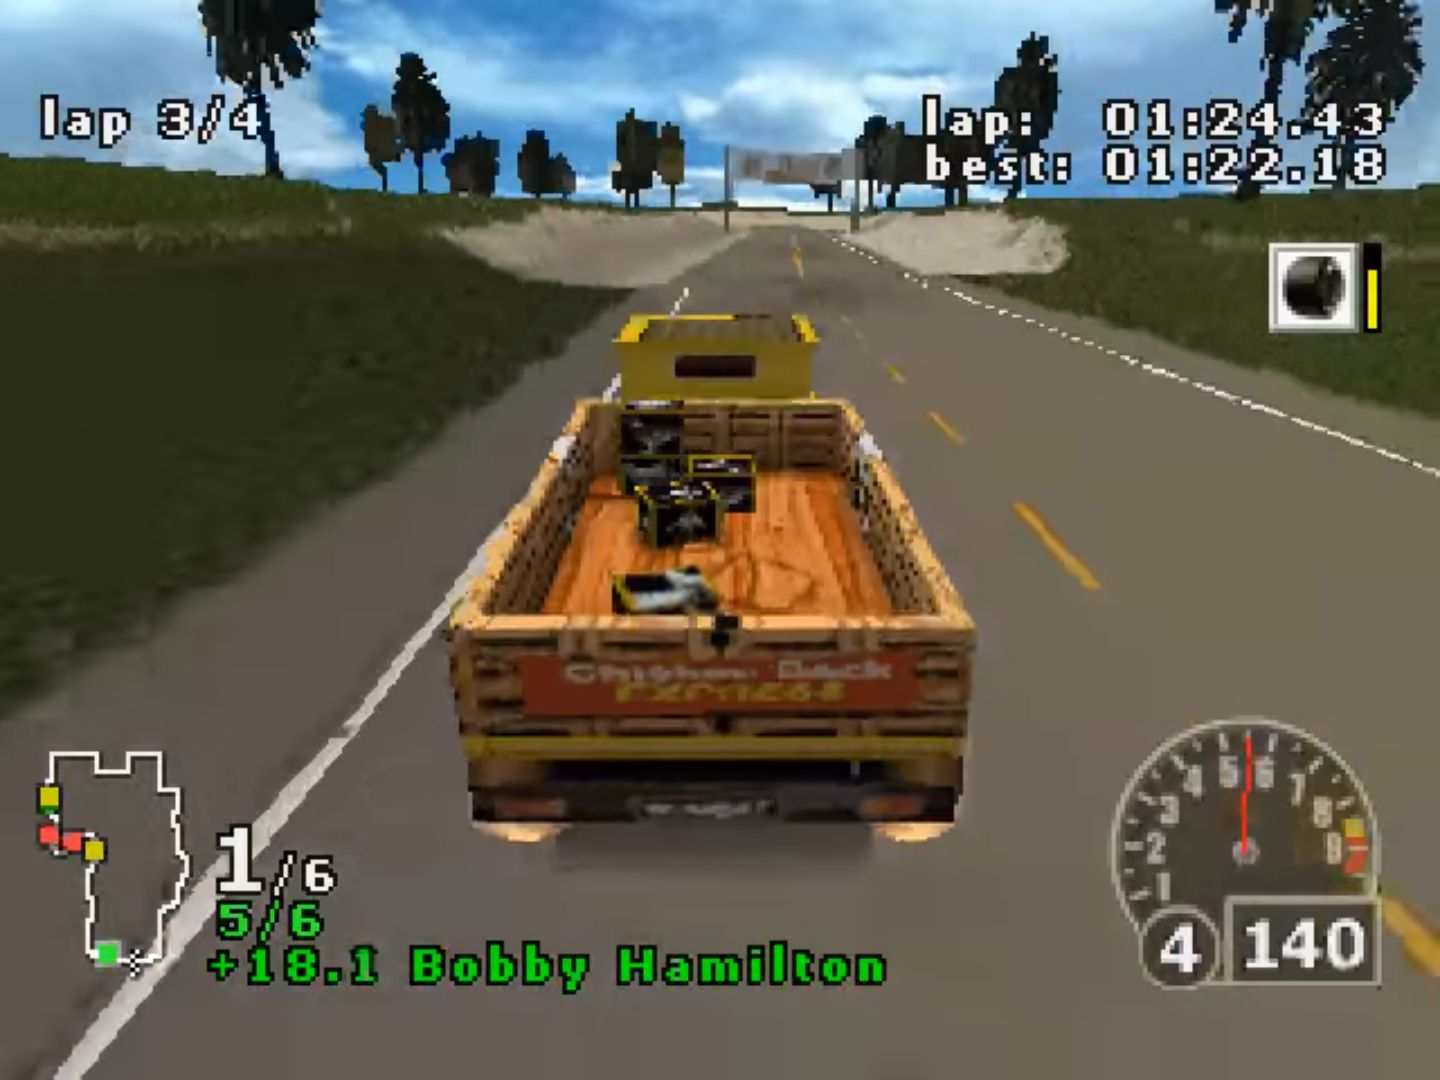 download rumble racing for ppsspp